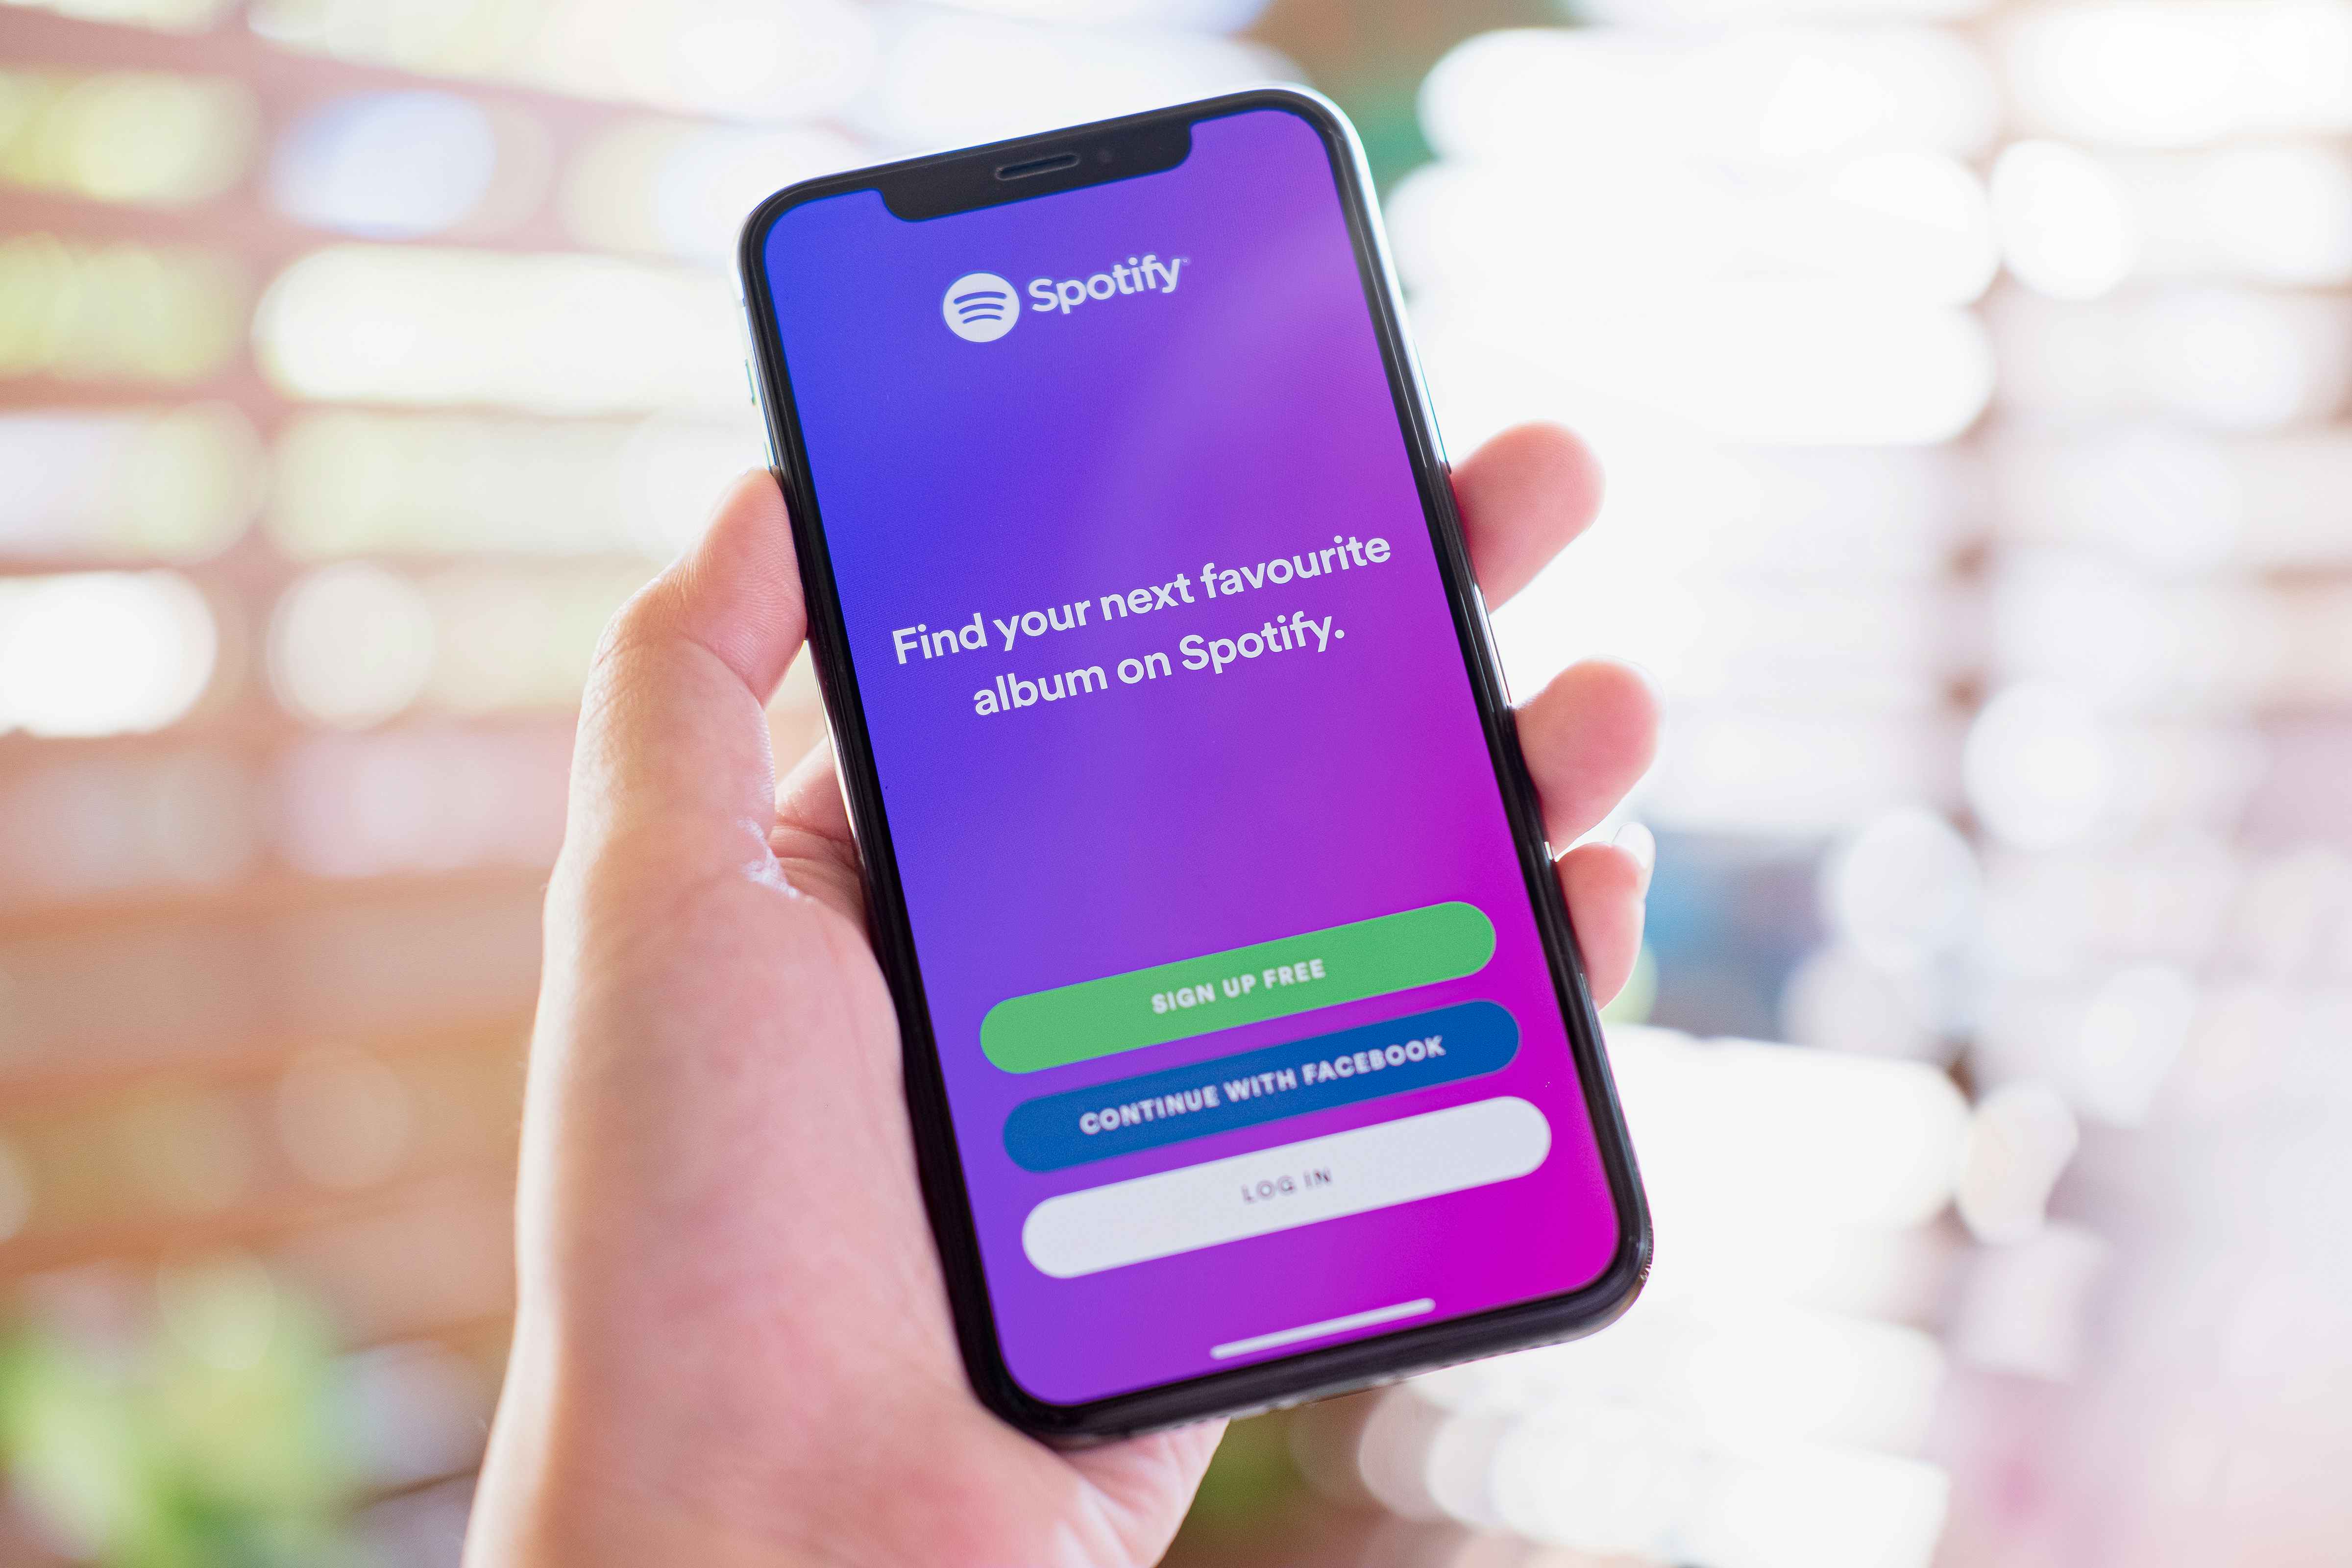 person holding a phone that shows the log in screen for Spotify